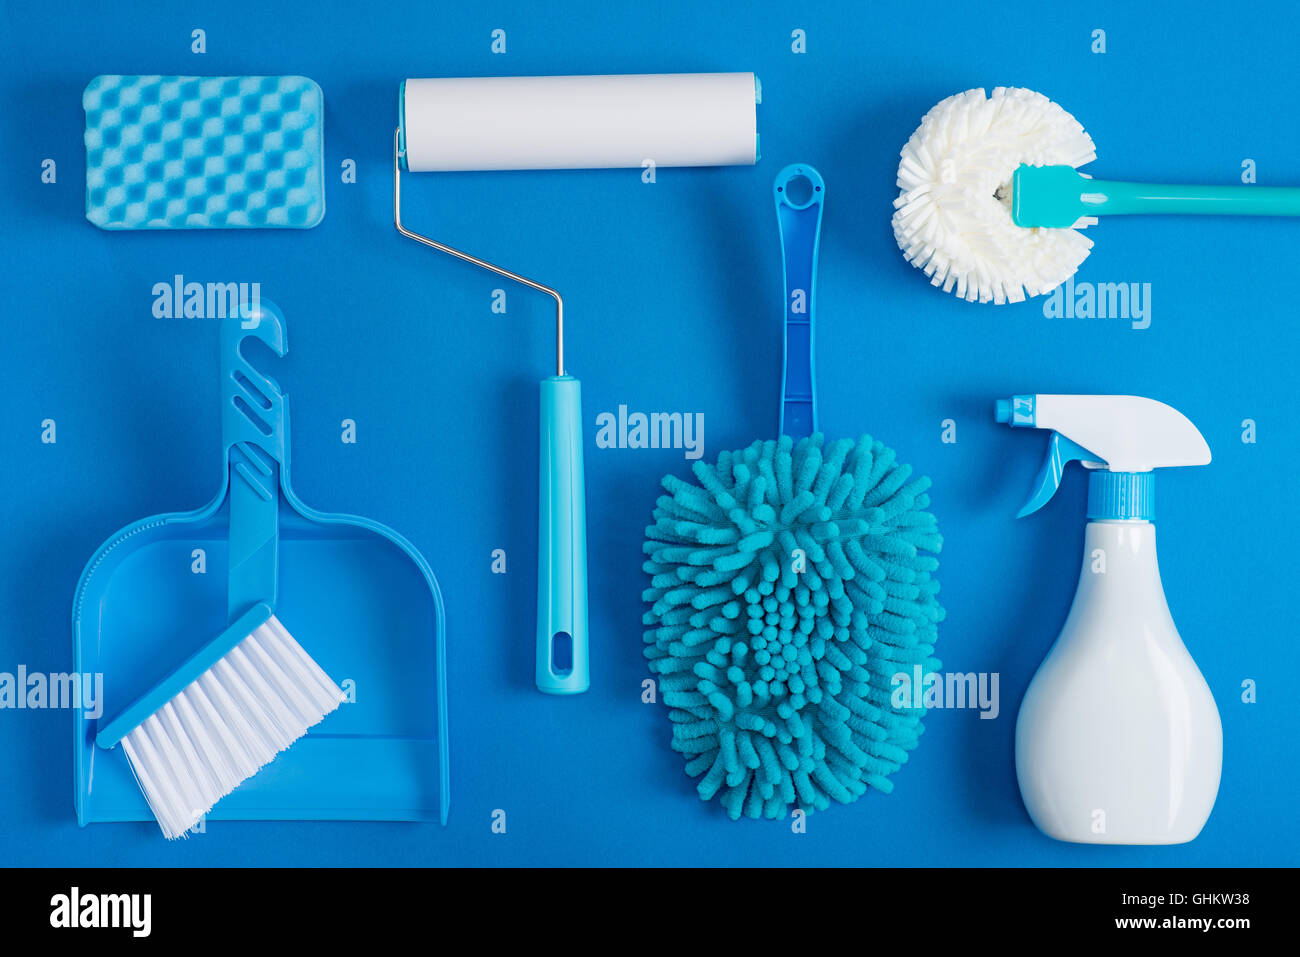 Cleaning tools layout Stock Photo